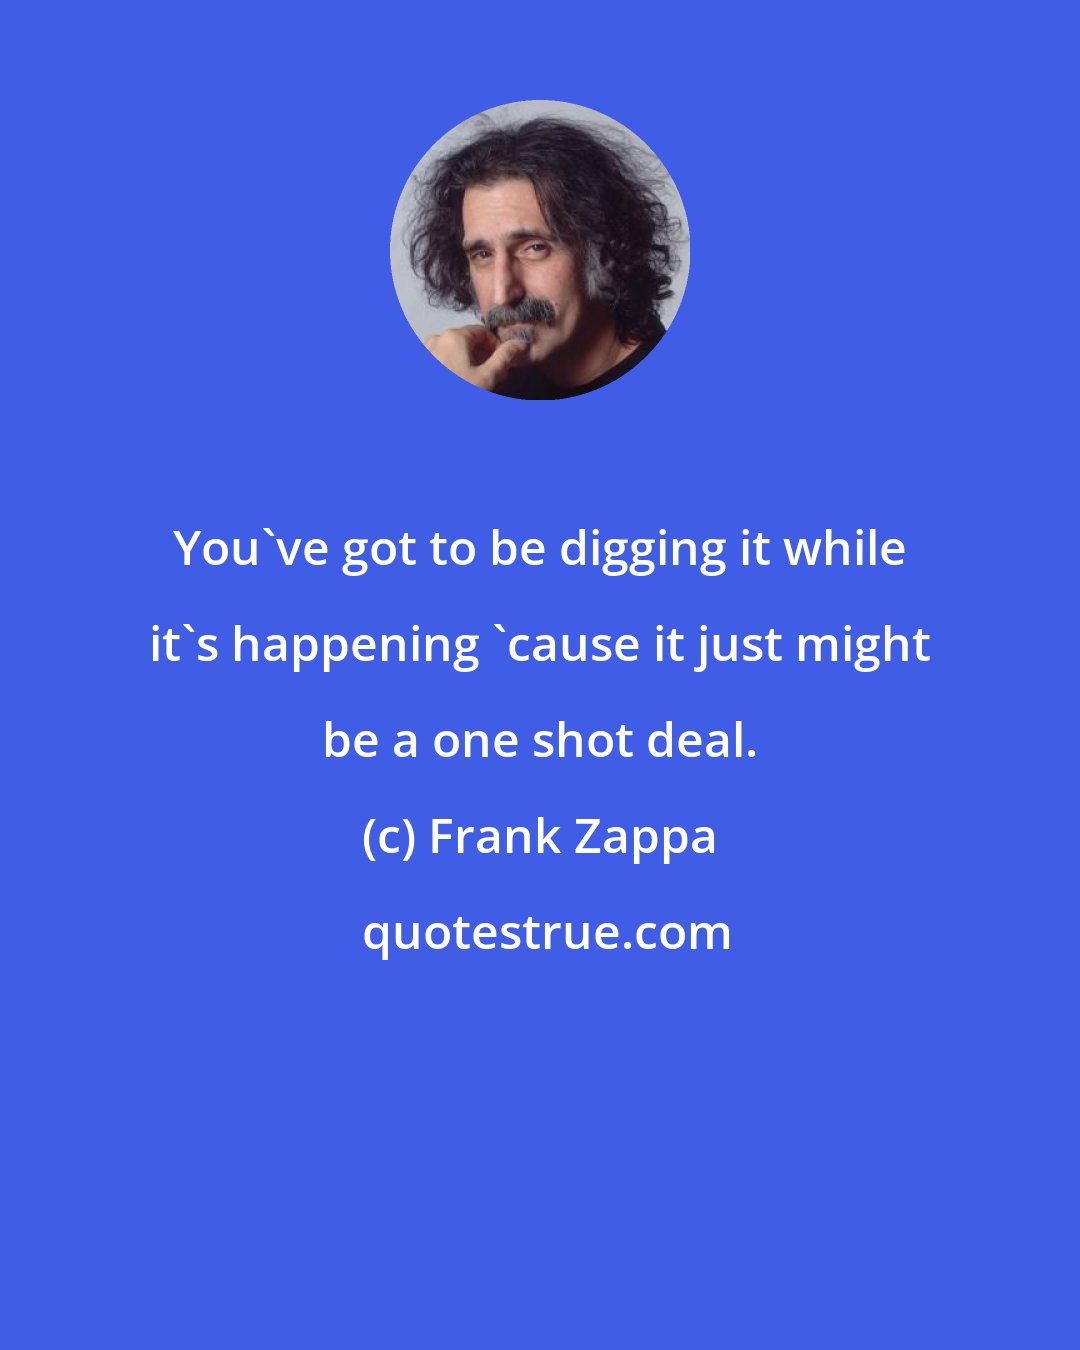 Frank Zappa: You've got to be digging it while it's happening 'cause it just might be a one shot deal.